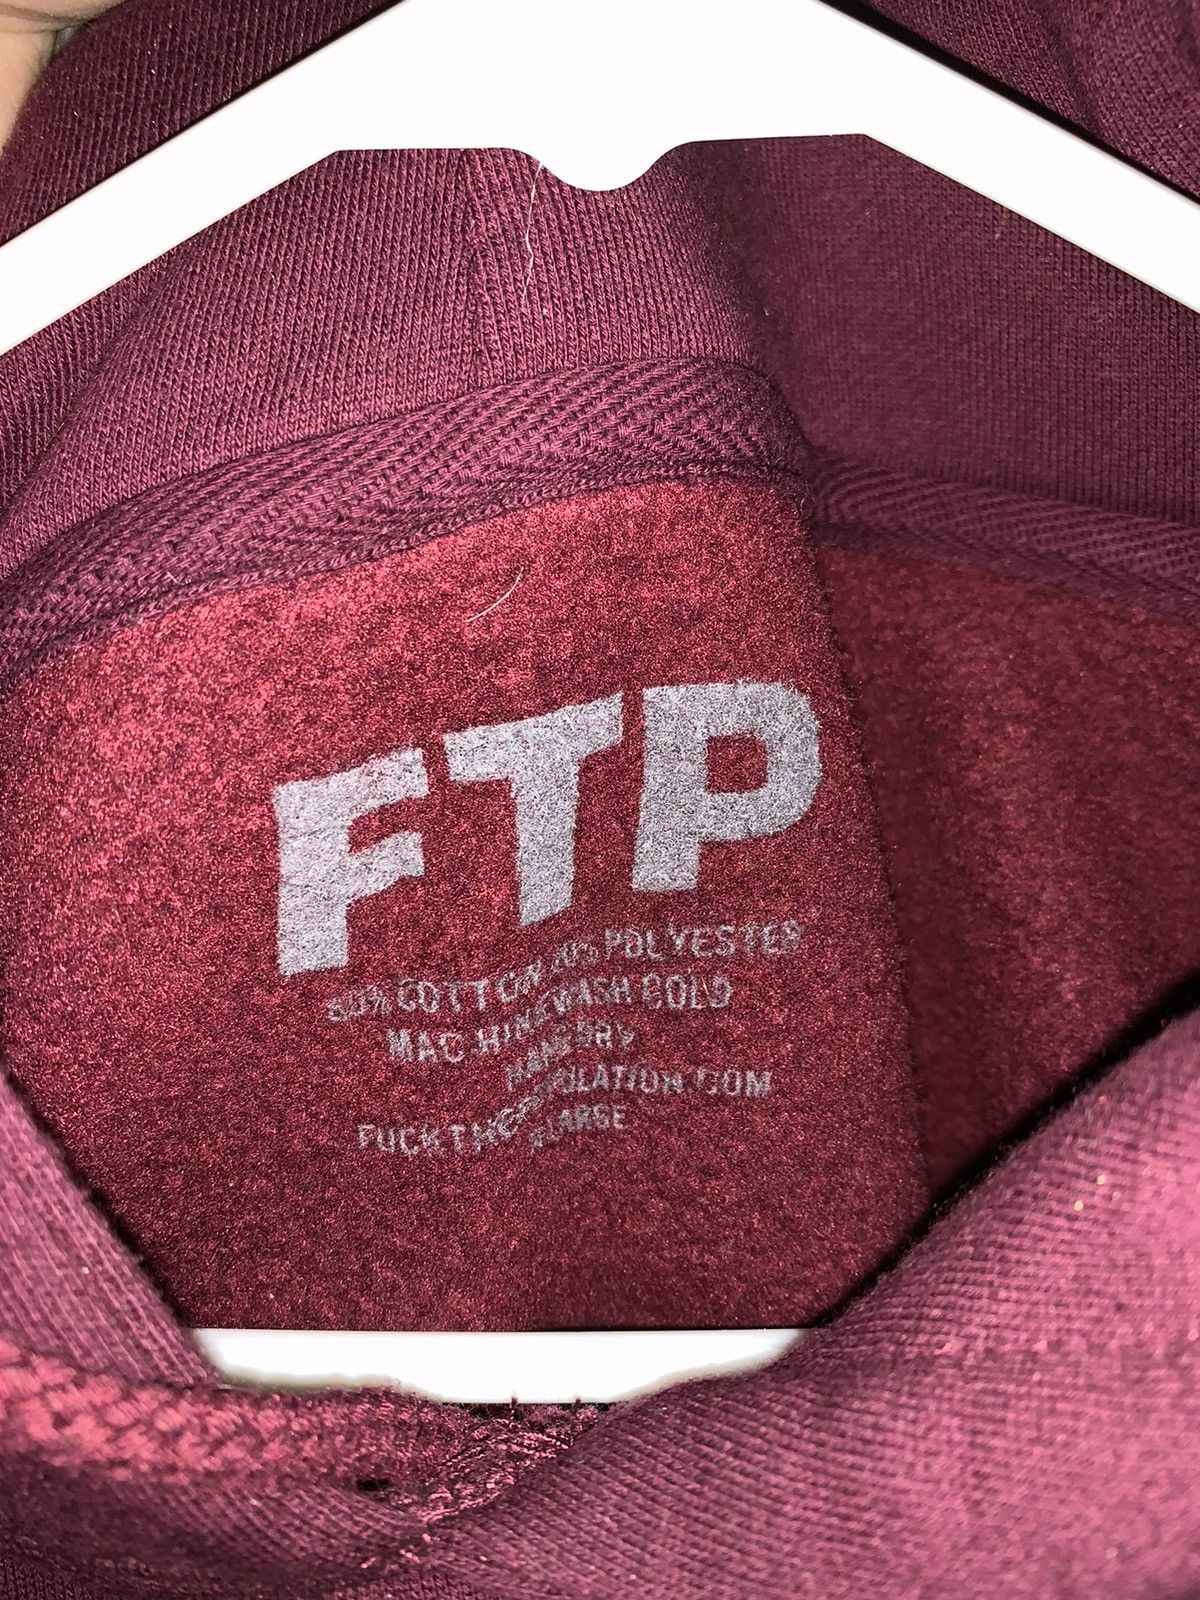 Fuck The Population FTP FUCK YOU Hoodie XL Size US XL / EU 56 / 4 - 5 Preview